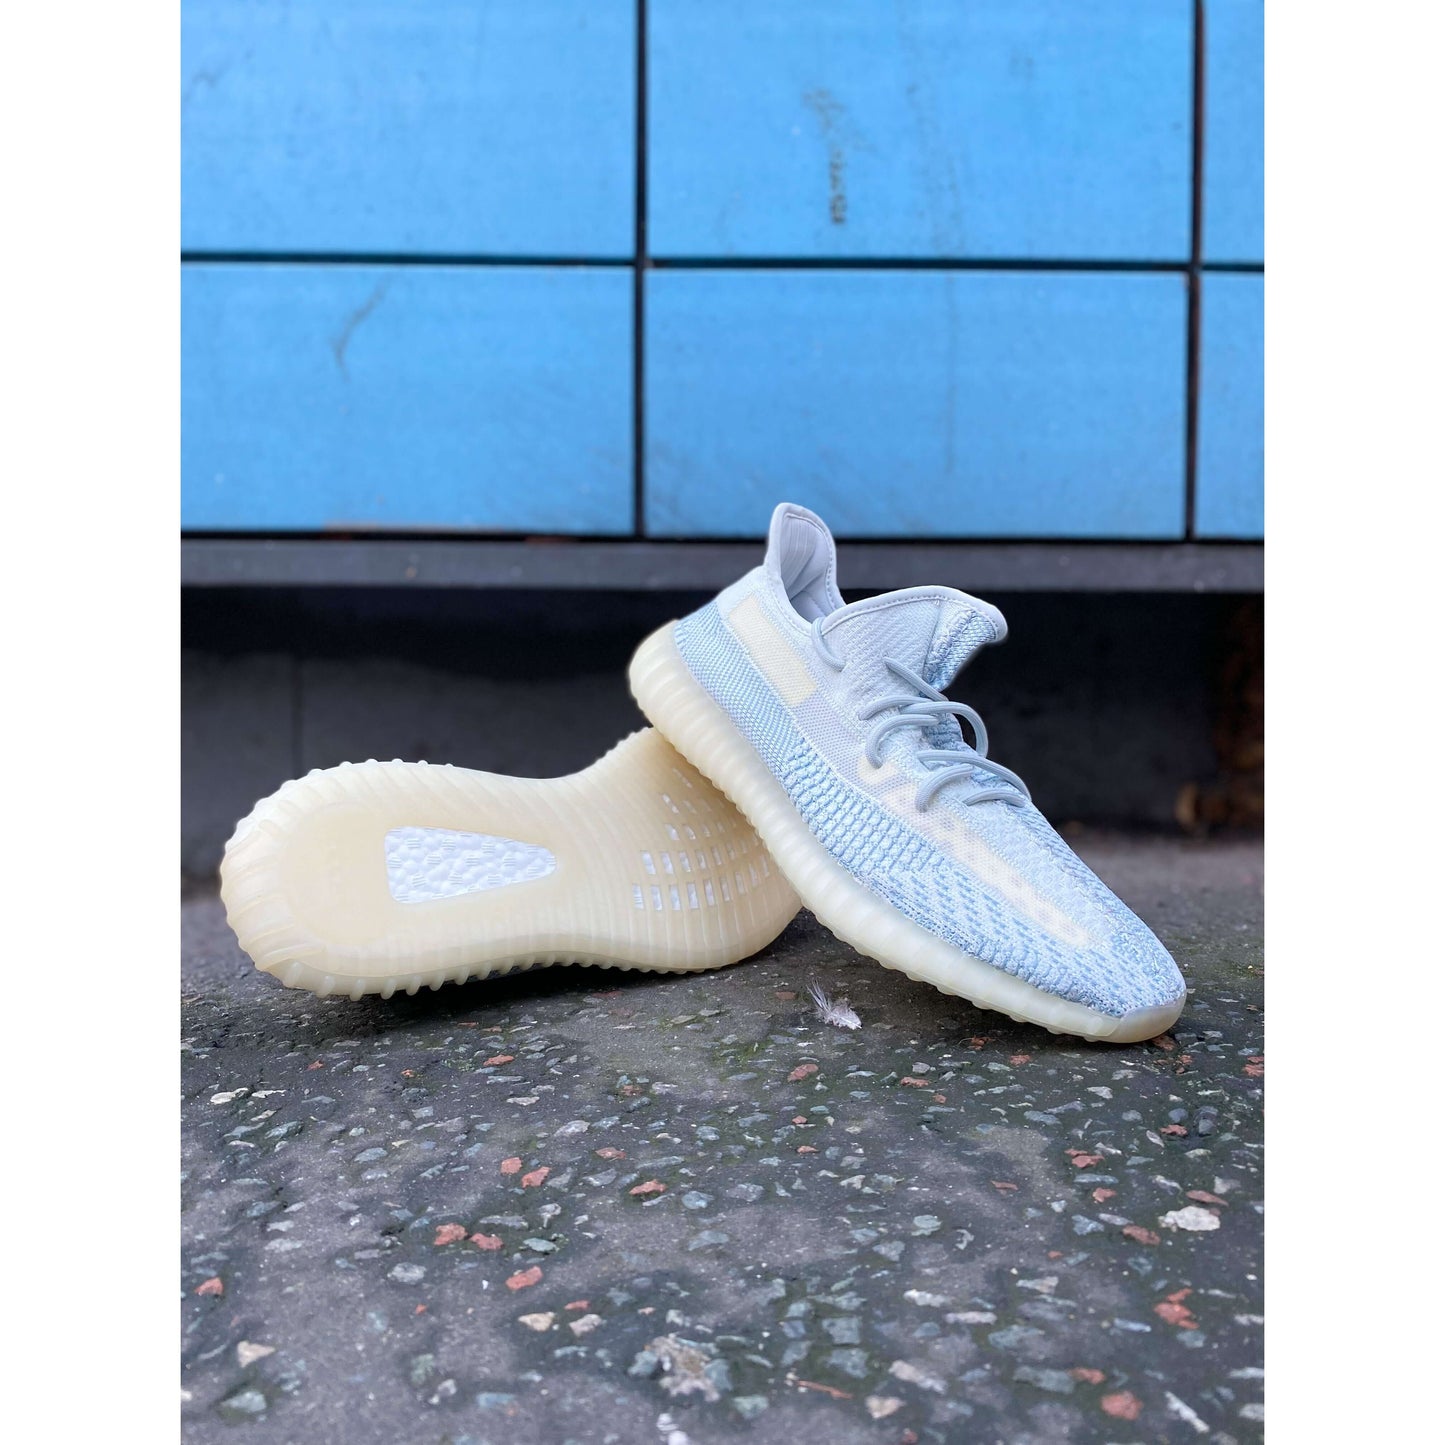 Adidas Yeezy Boost 350 V2 Cloud White (Non-Reflective) from Yeezy